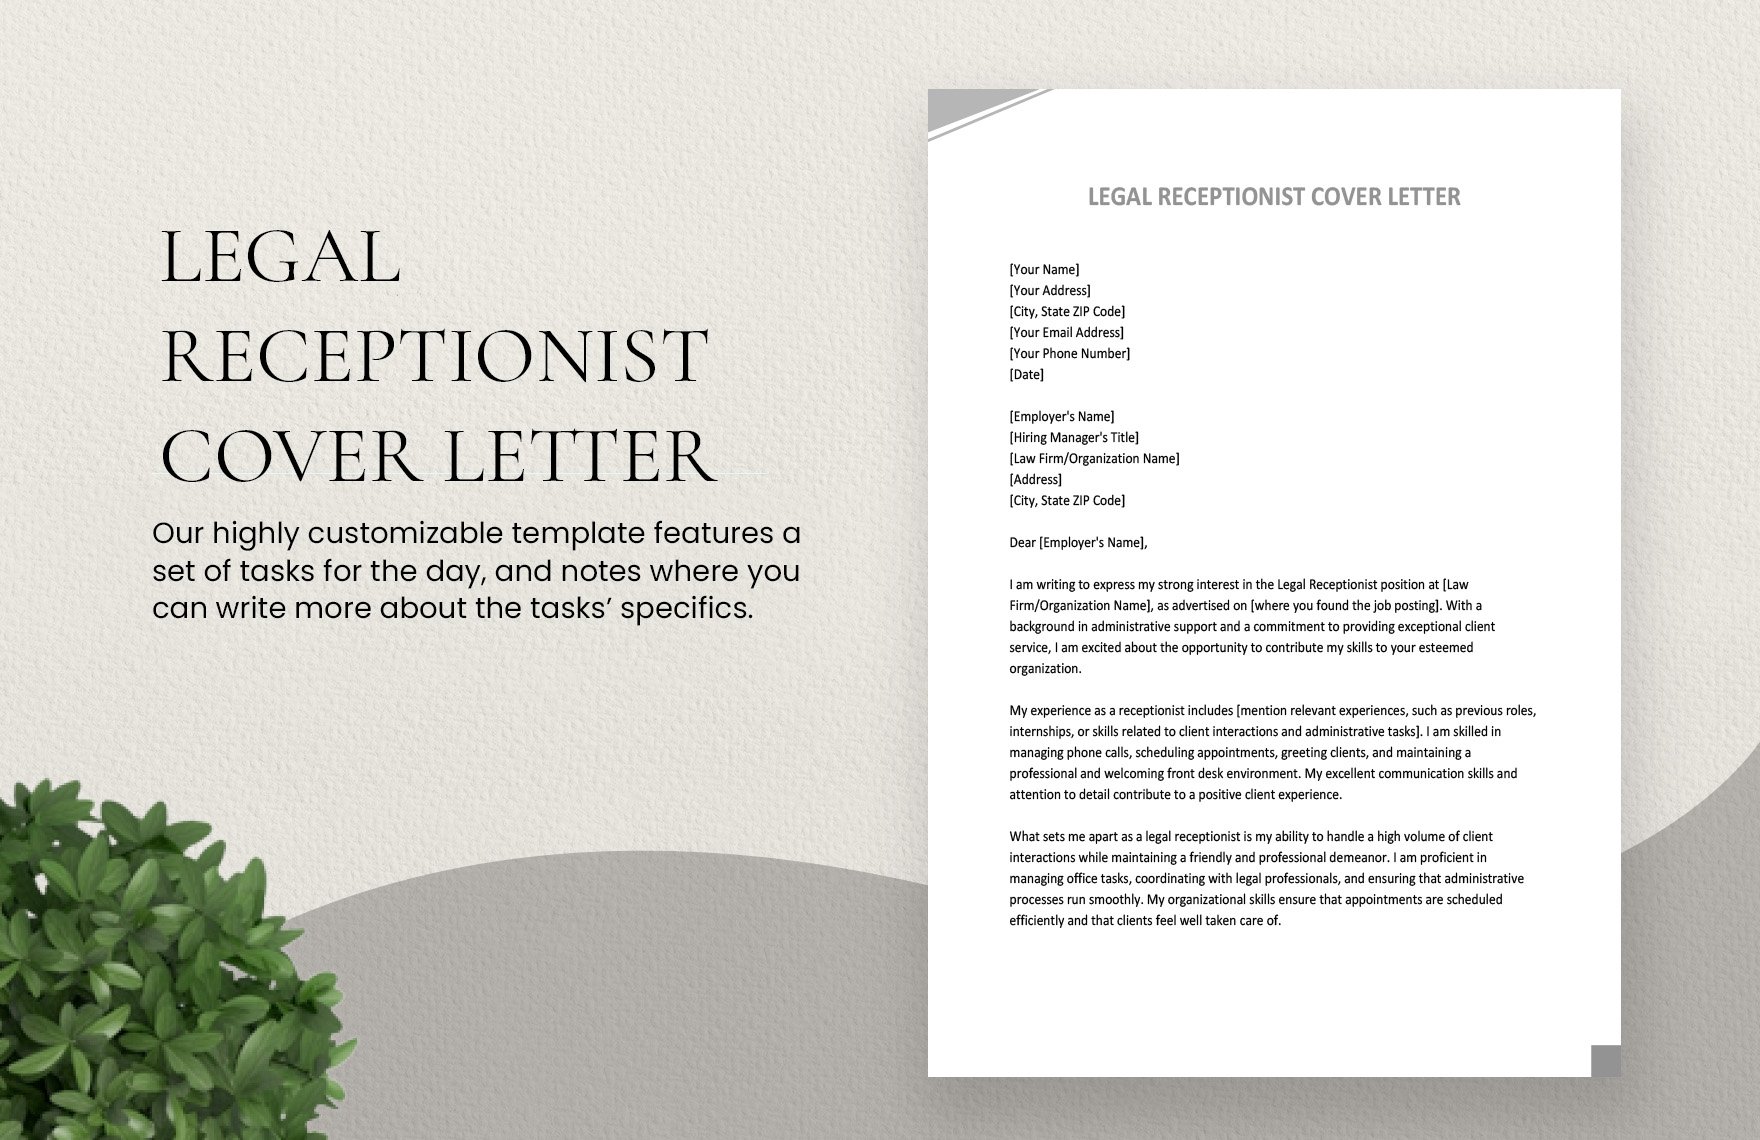 Legal Receptionist Cover Letter